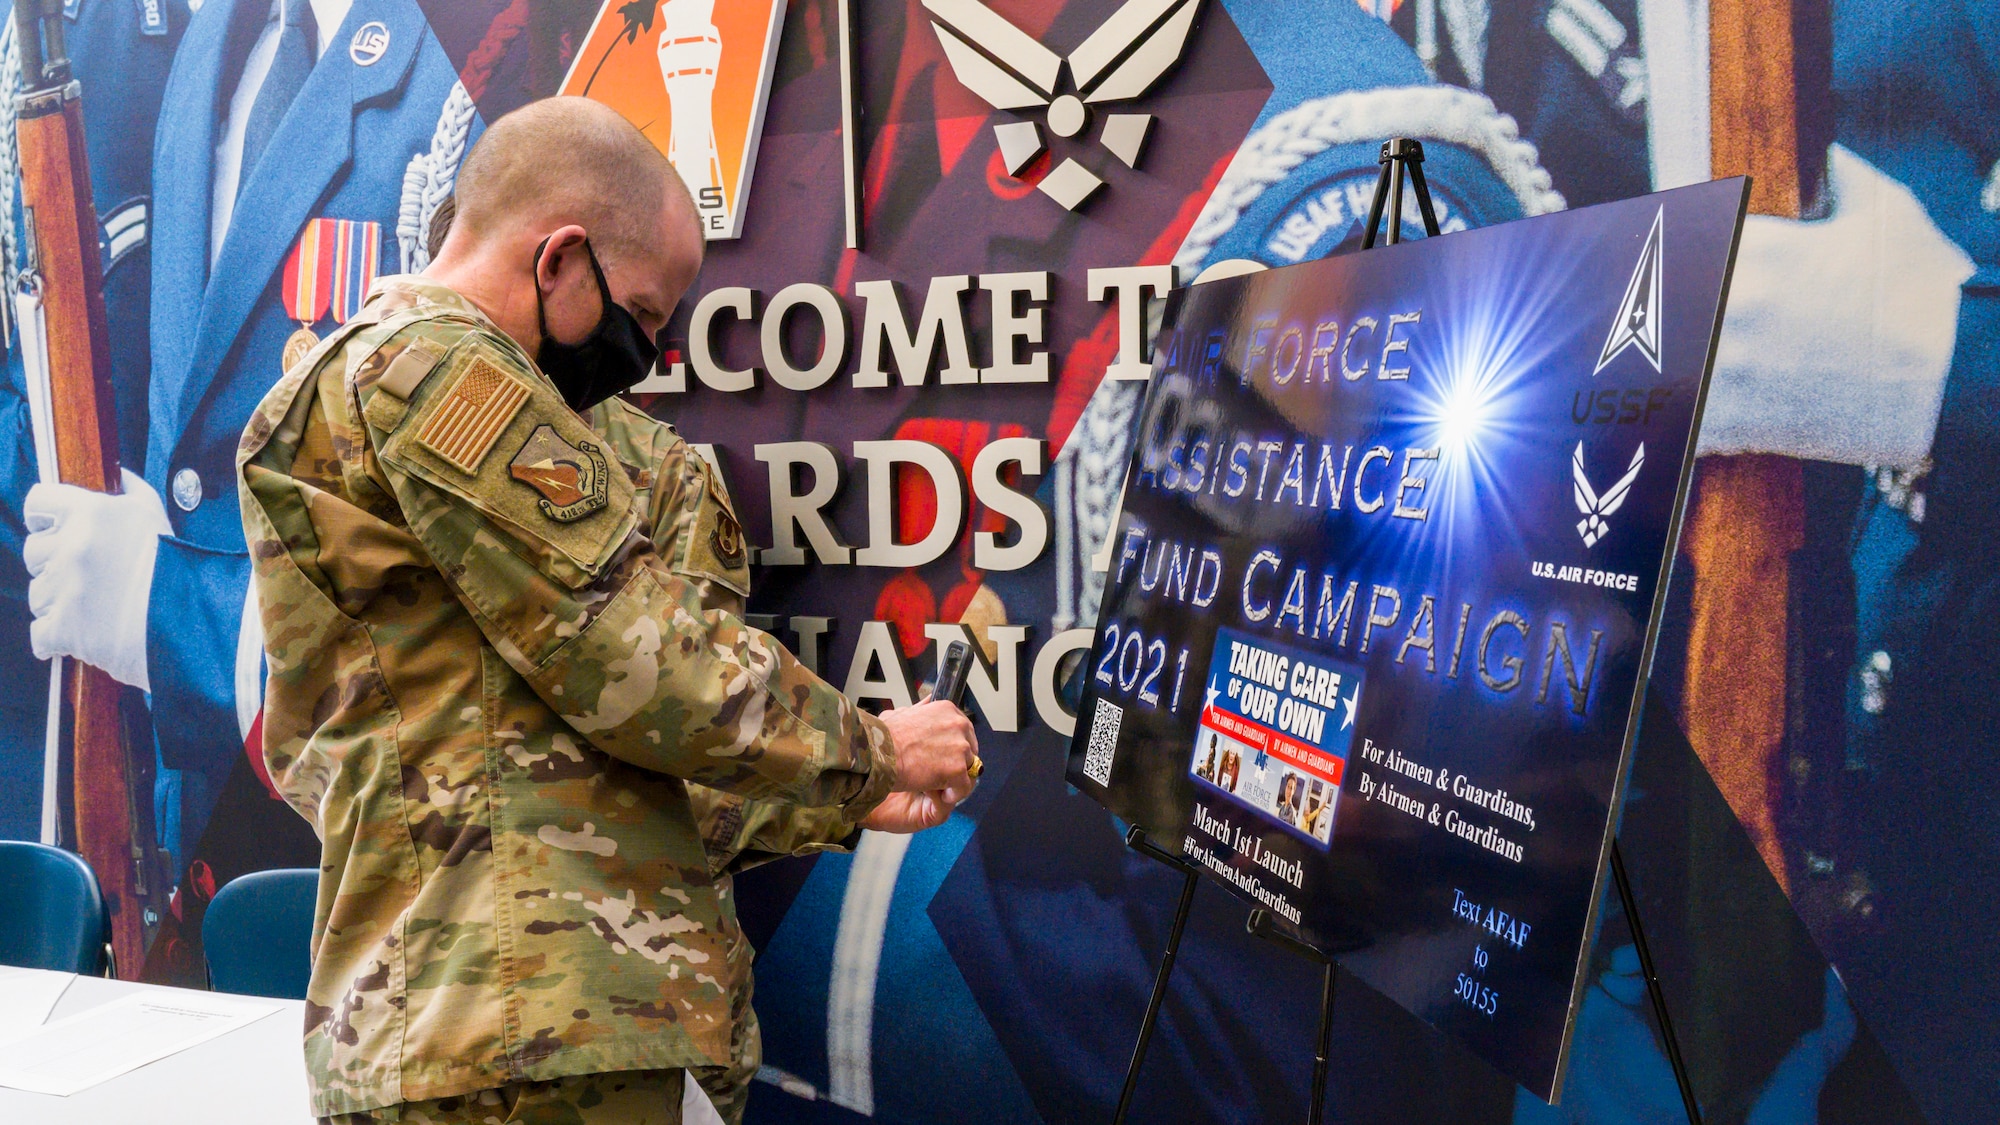 Brig. Gen. Matthew Higer, 412th Test Wing Commander, scans the QR code for the Air Force Assistance Fund on his cell phone at Edwards Air Force Base, California, March 22. The campaign, titled “For Airmen & Guardians, By Airmen & Guardians," runs until April 30. (Air Force photo by Giancarlo Casem)